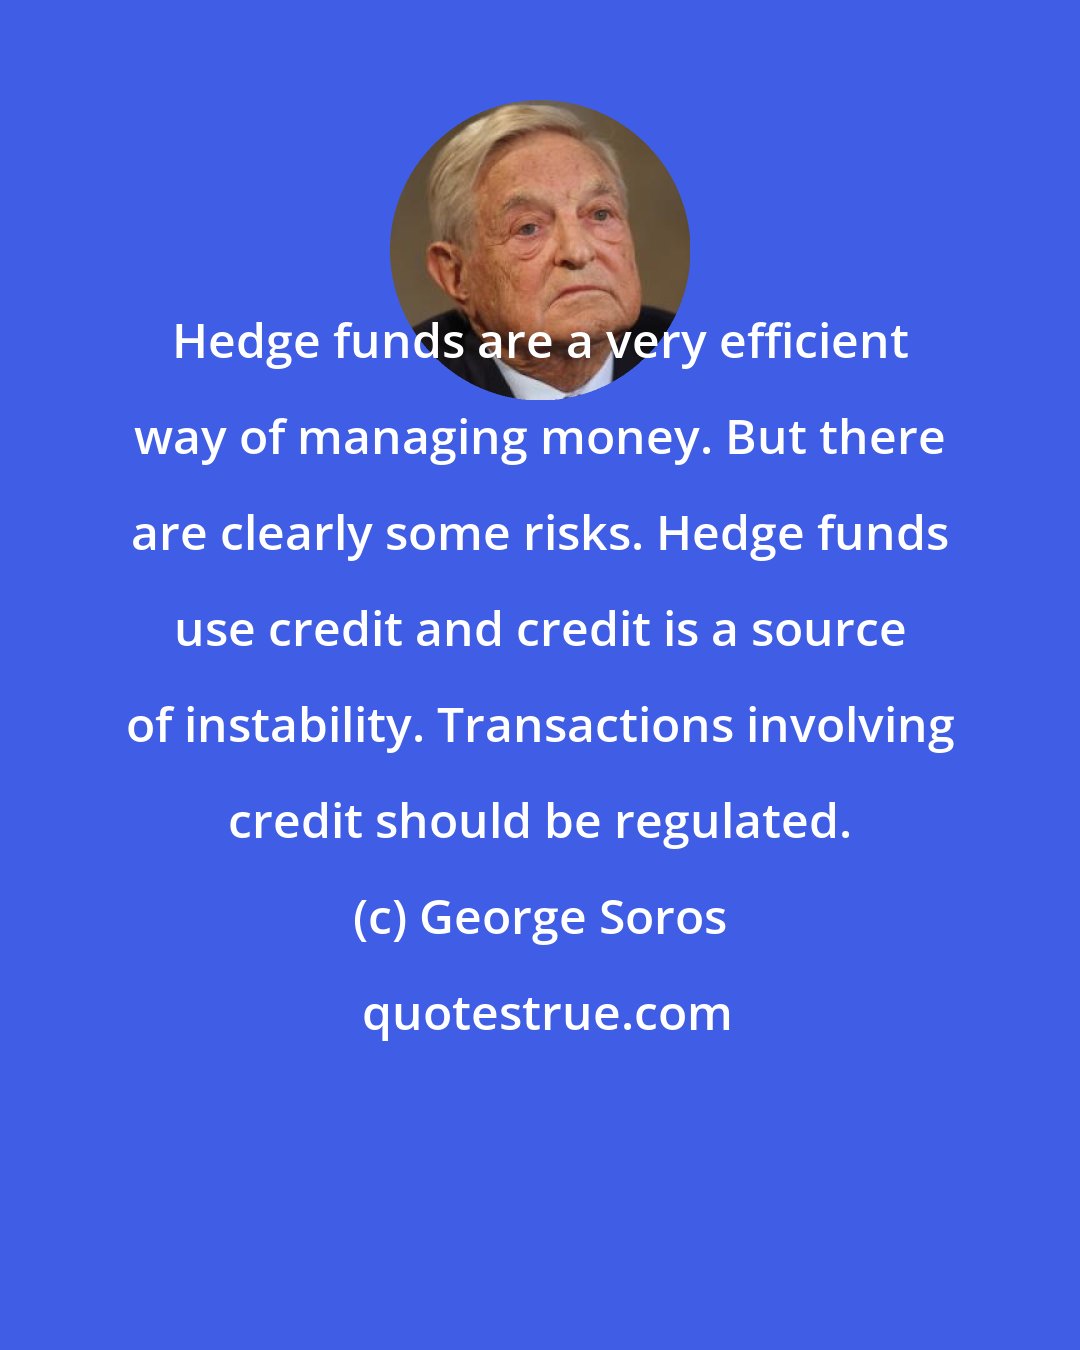 George Soros: Hedge funds are a very efficient way of managing money. But there are clearly some risks. Hedge funds use credit and credit is a source of instability. Transactions involving credit should be regulated.